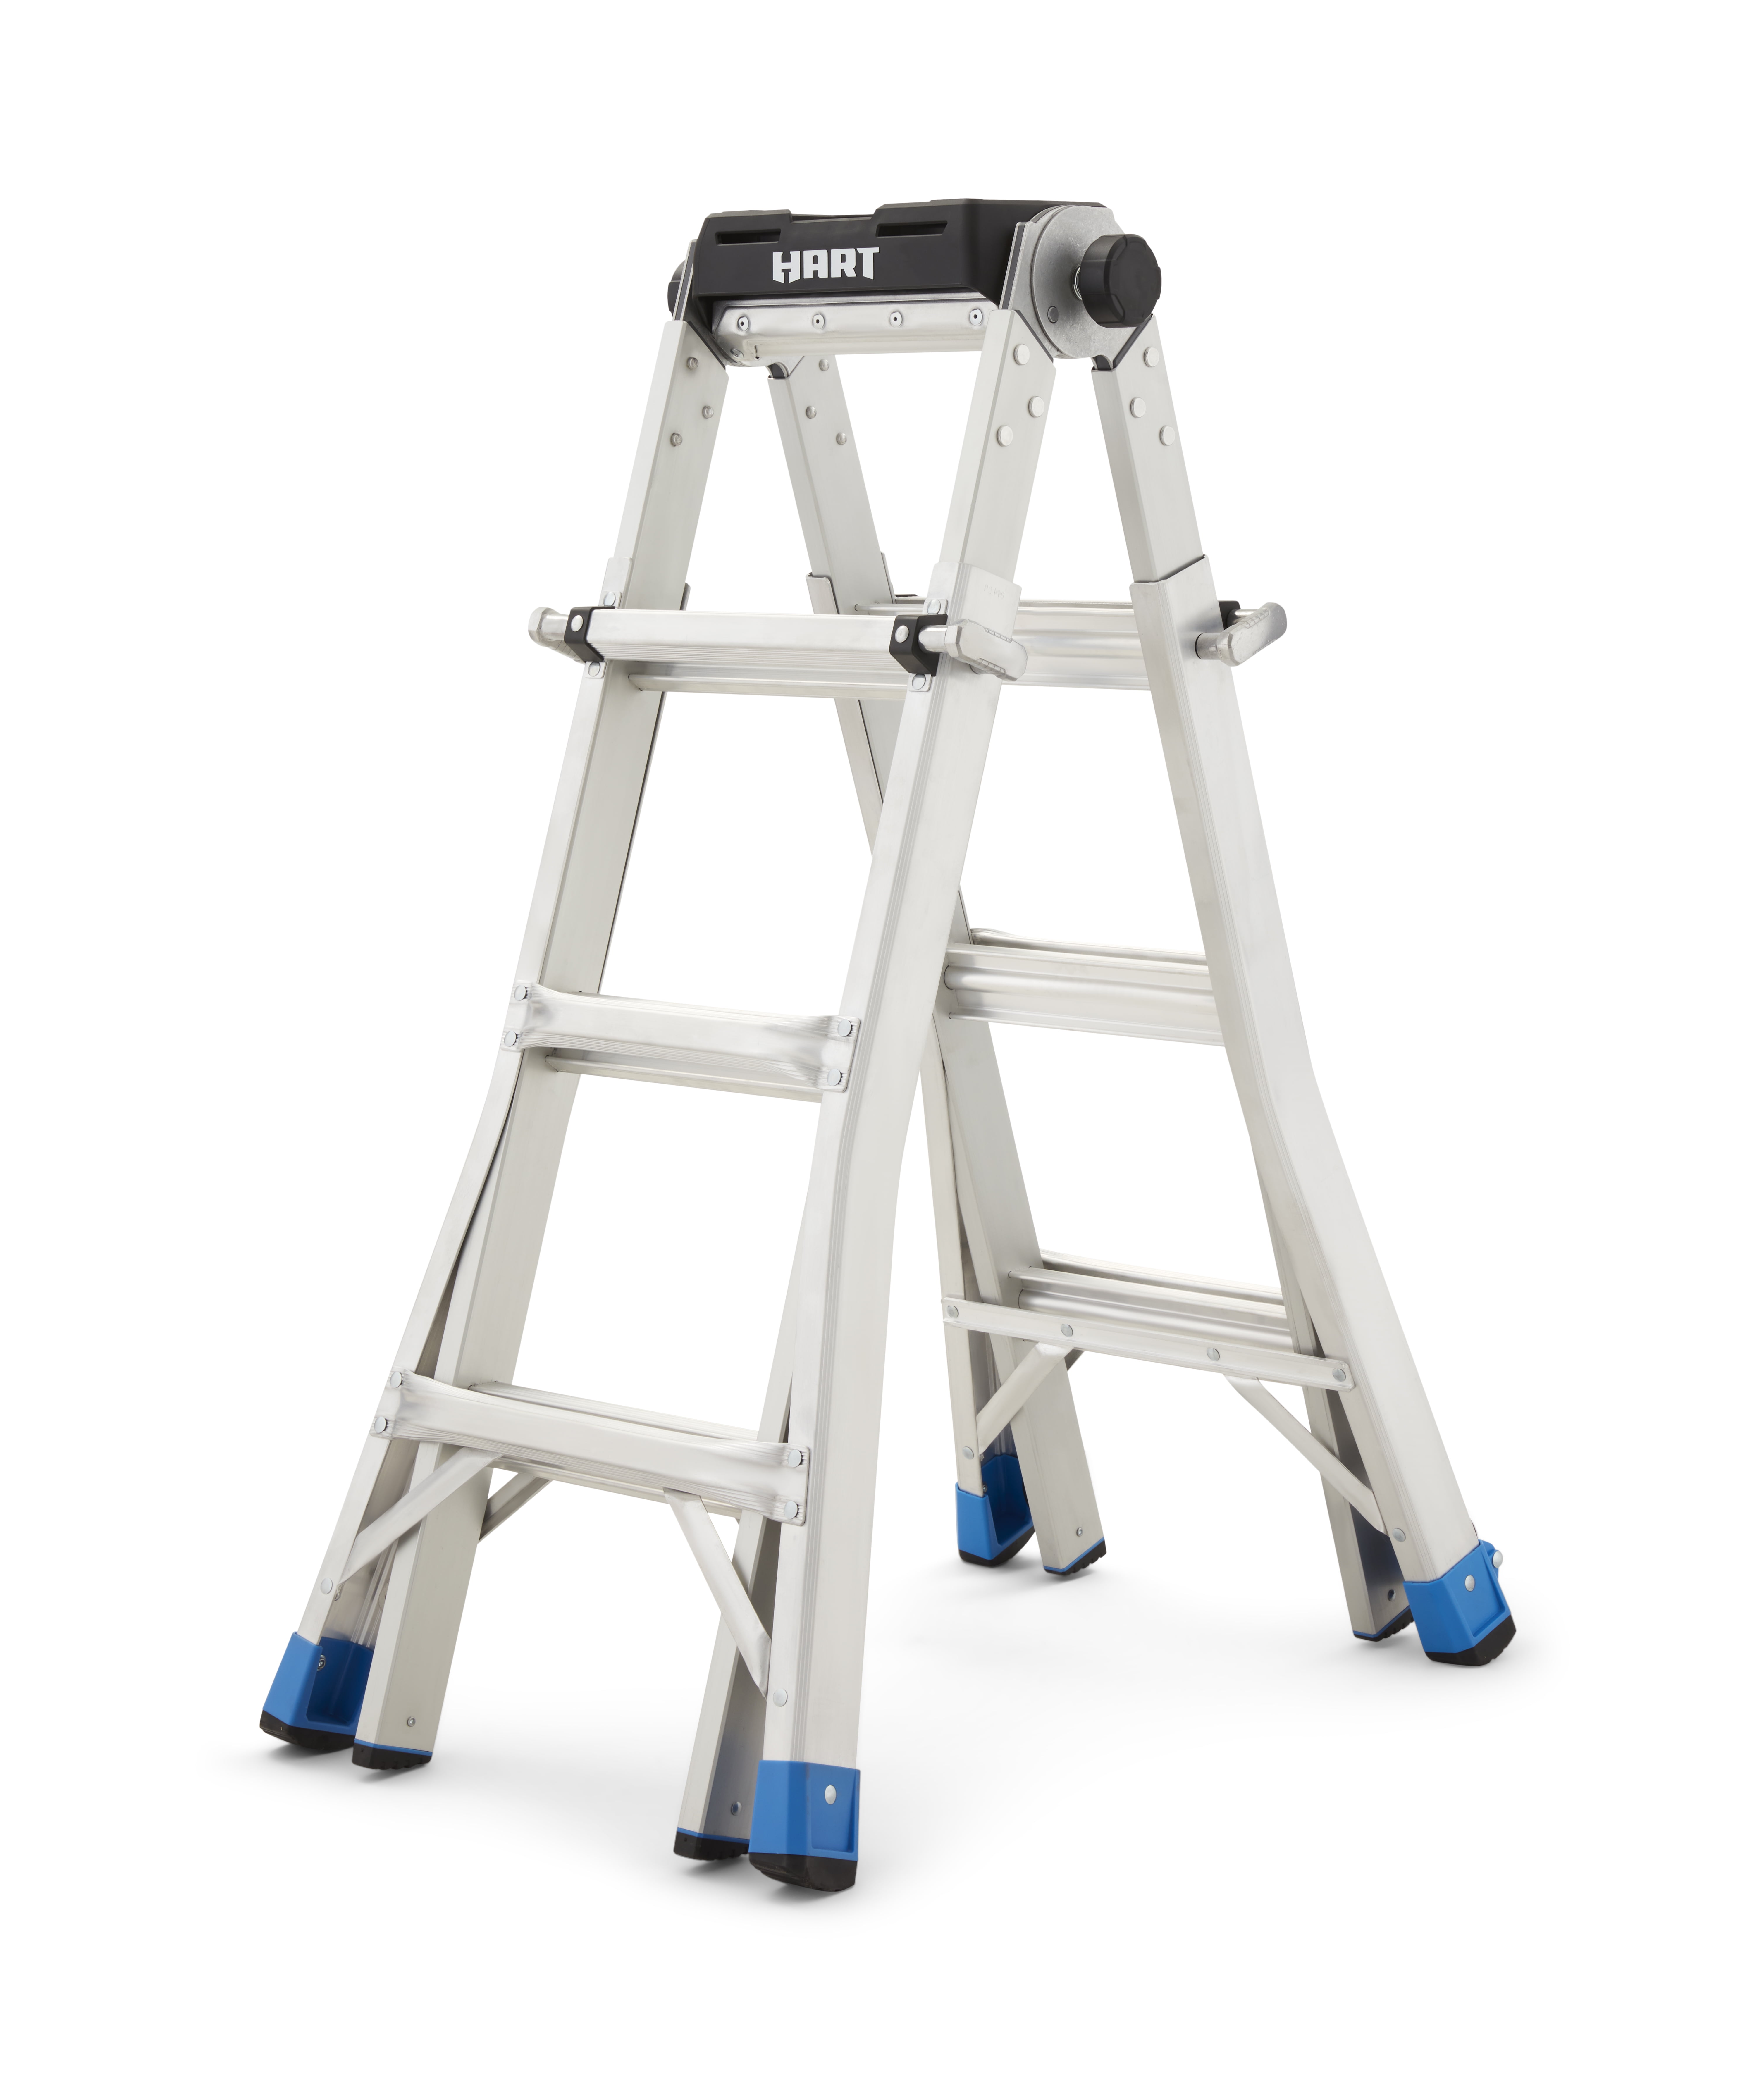 HART 15 ft Multiposition Ladder w/ Project Top